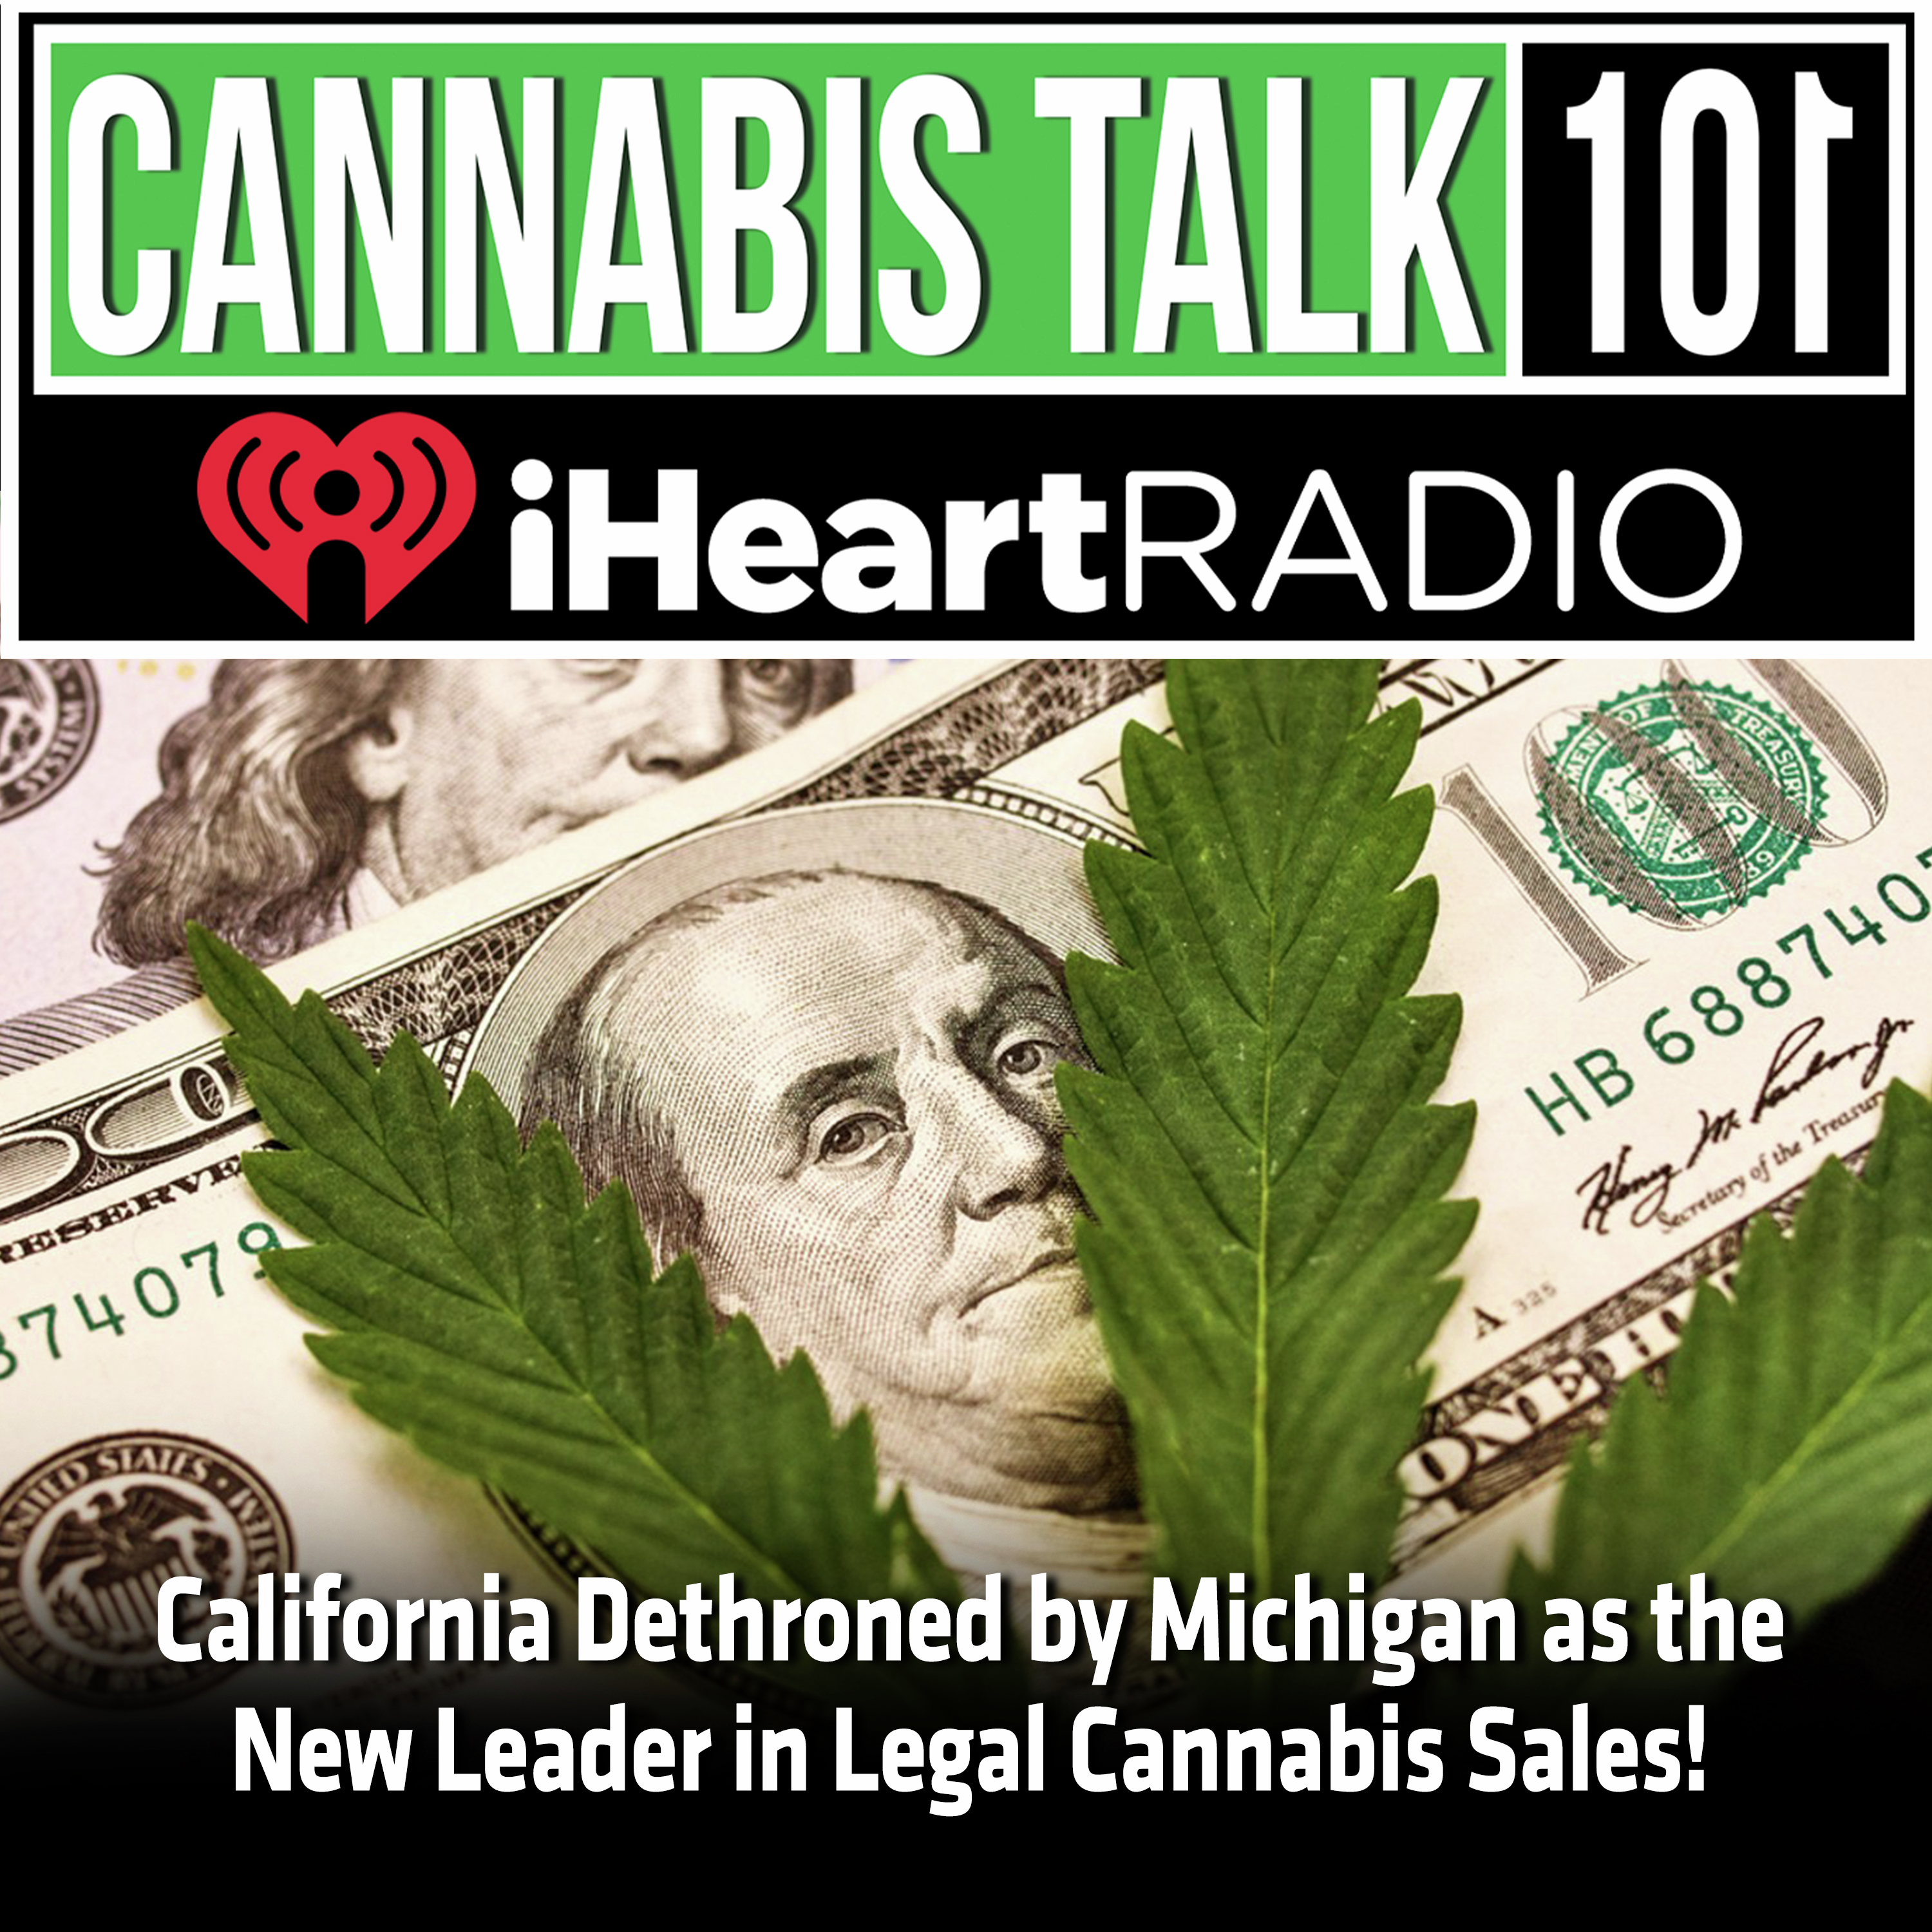 California Dethroned by Michigan as the New Leader in Legal Cannabis Sales!